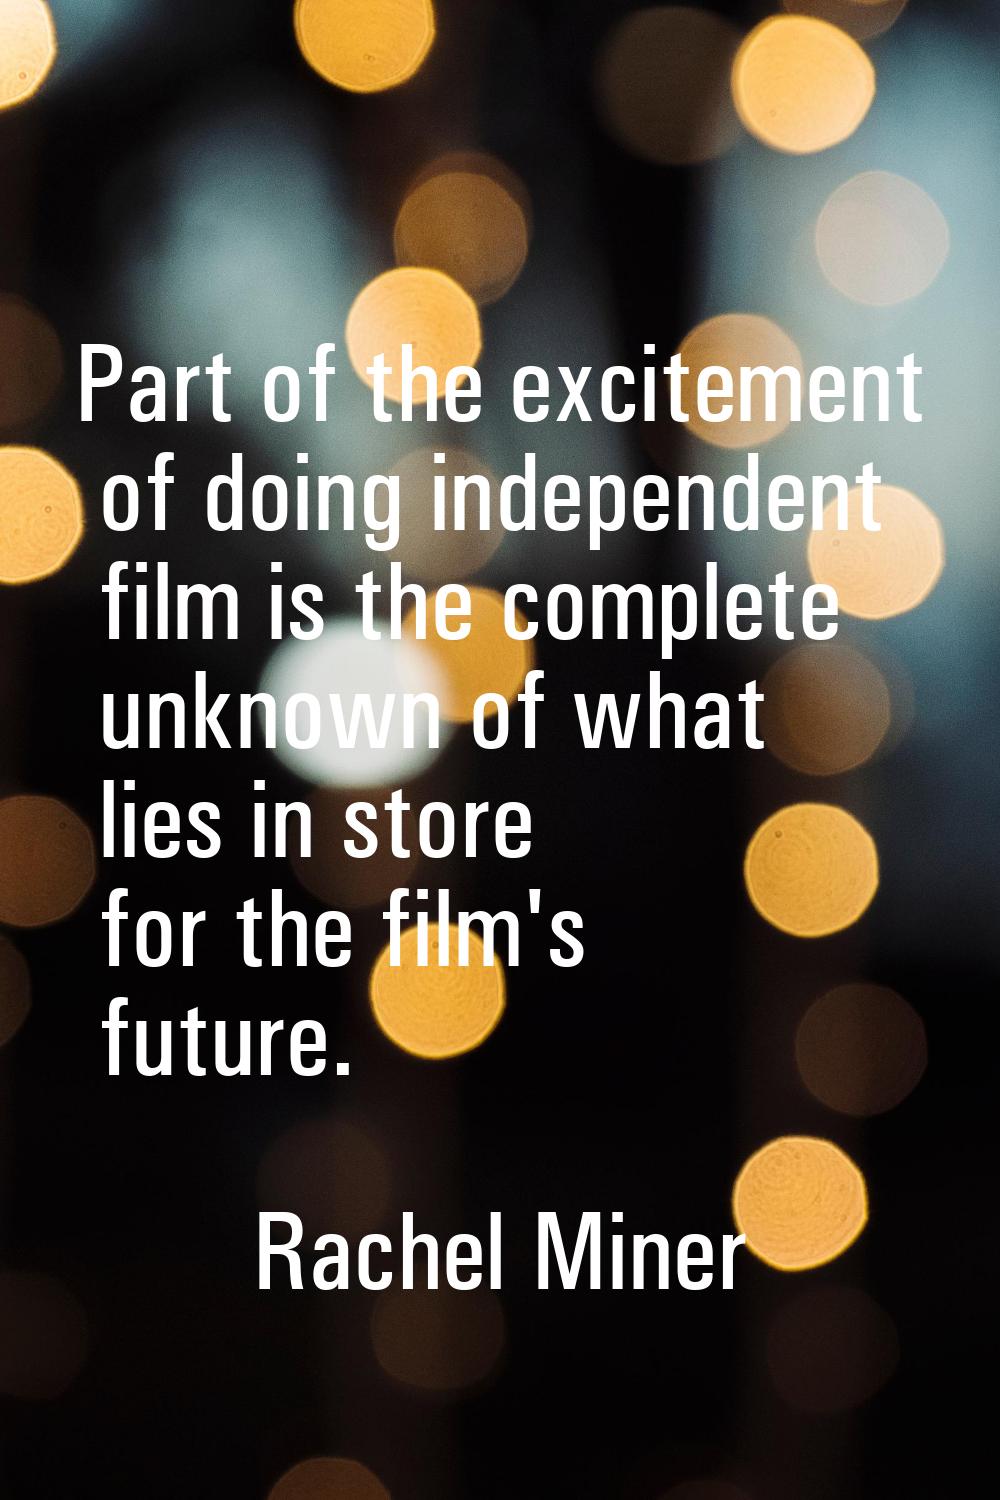 Part of the excitement of doing independent film is the complete unknown of what lies in store for 